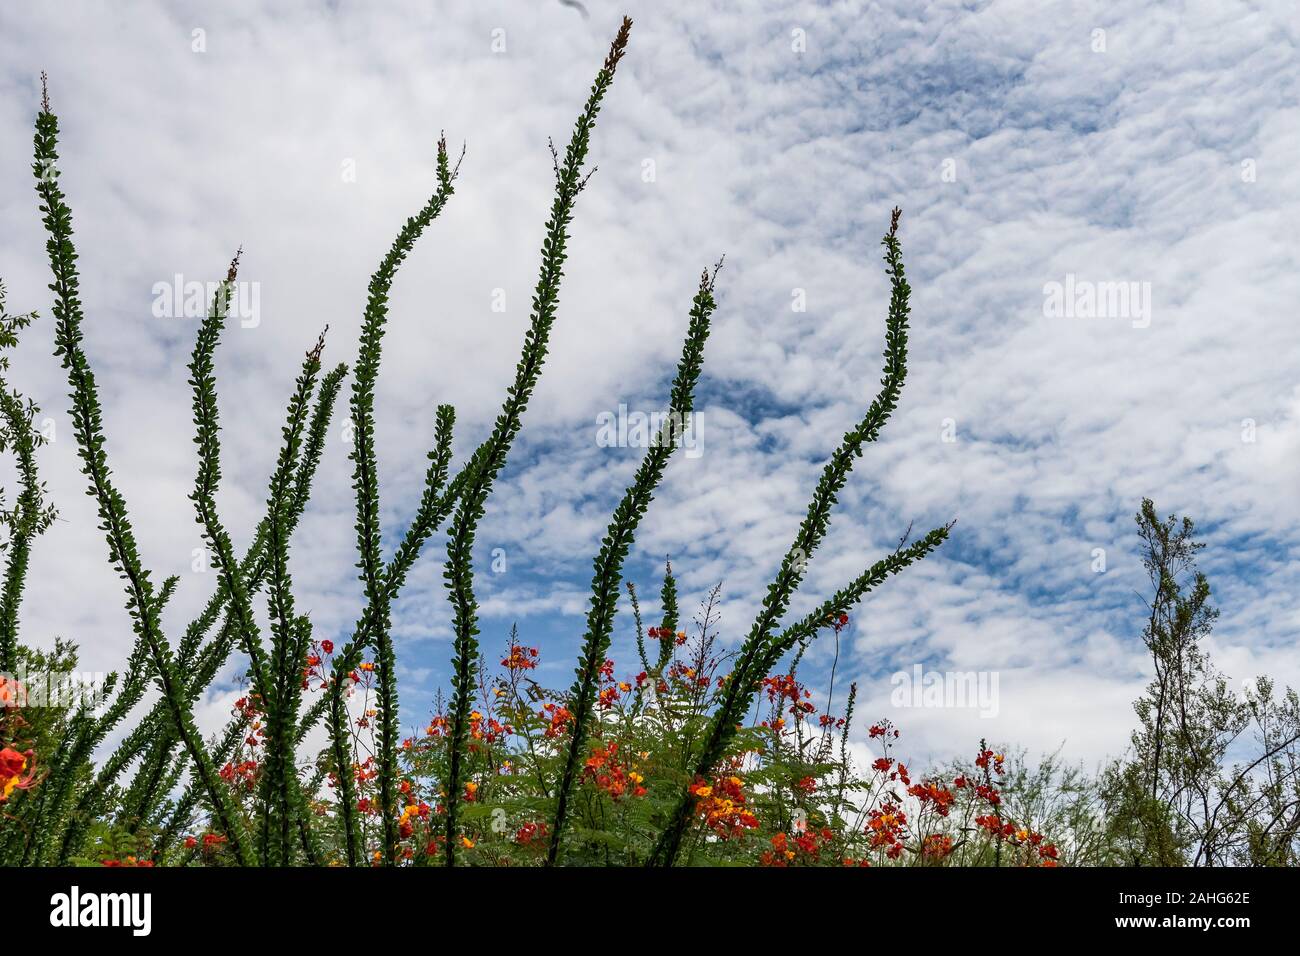 Ocotillos and Mexican Bird of Paradise against a blue sky with clouds Stock Photo